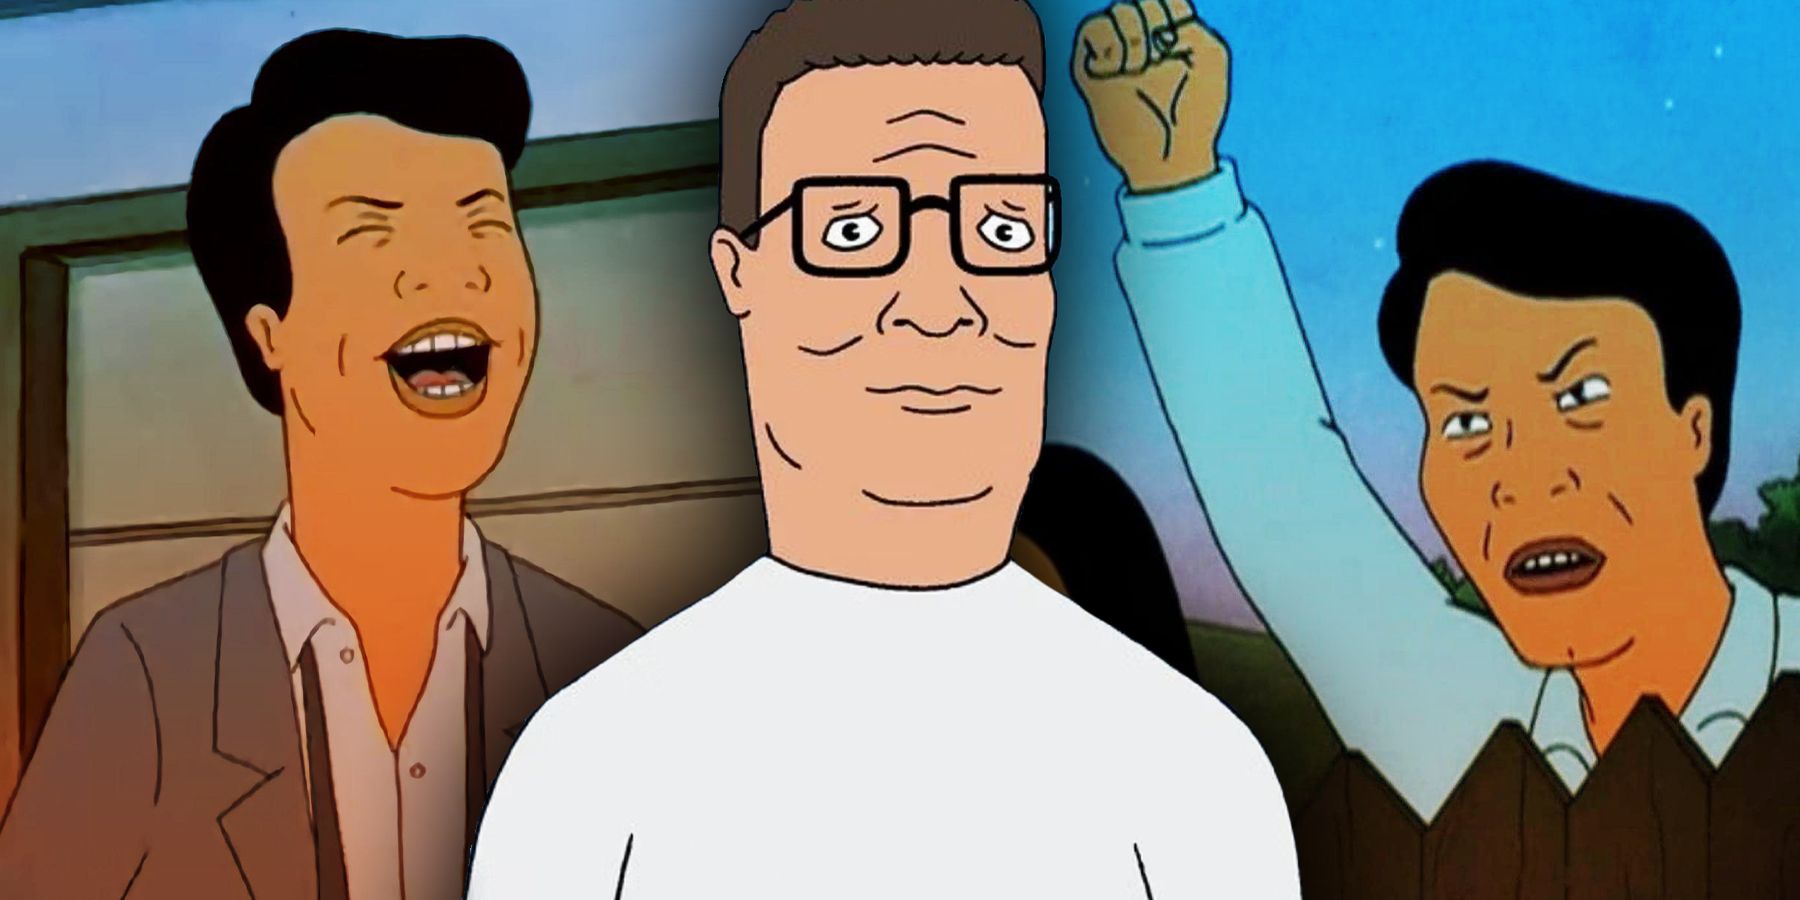 King of the Hill's Hank smiles in front of two images of his neighbor Kahn